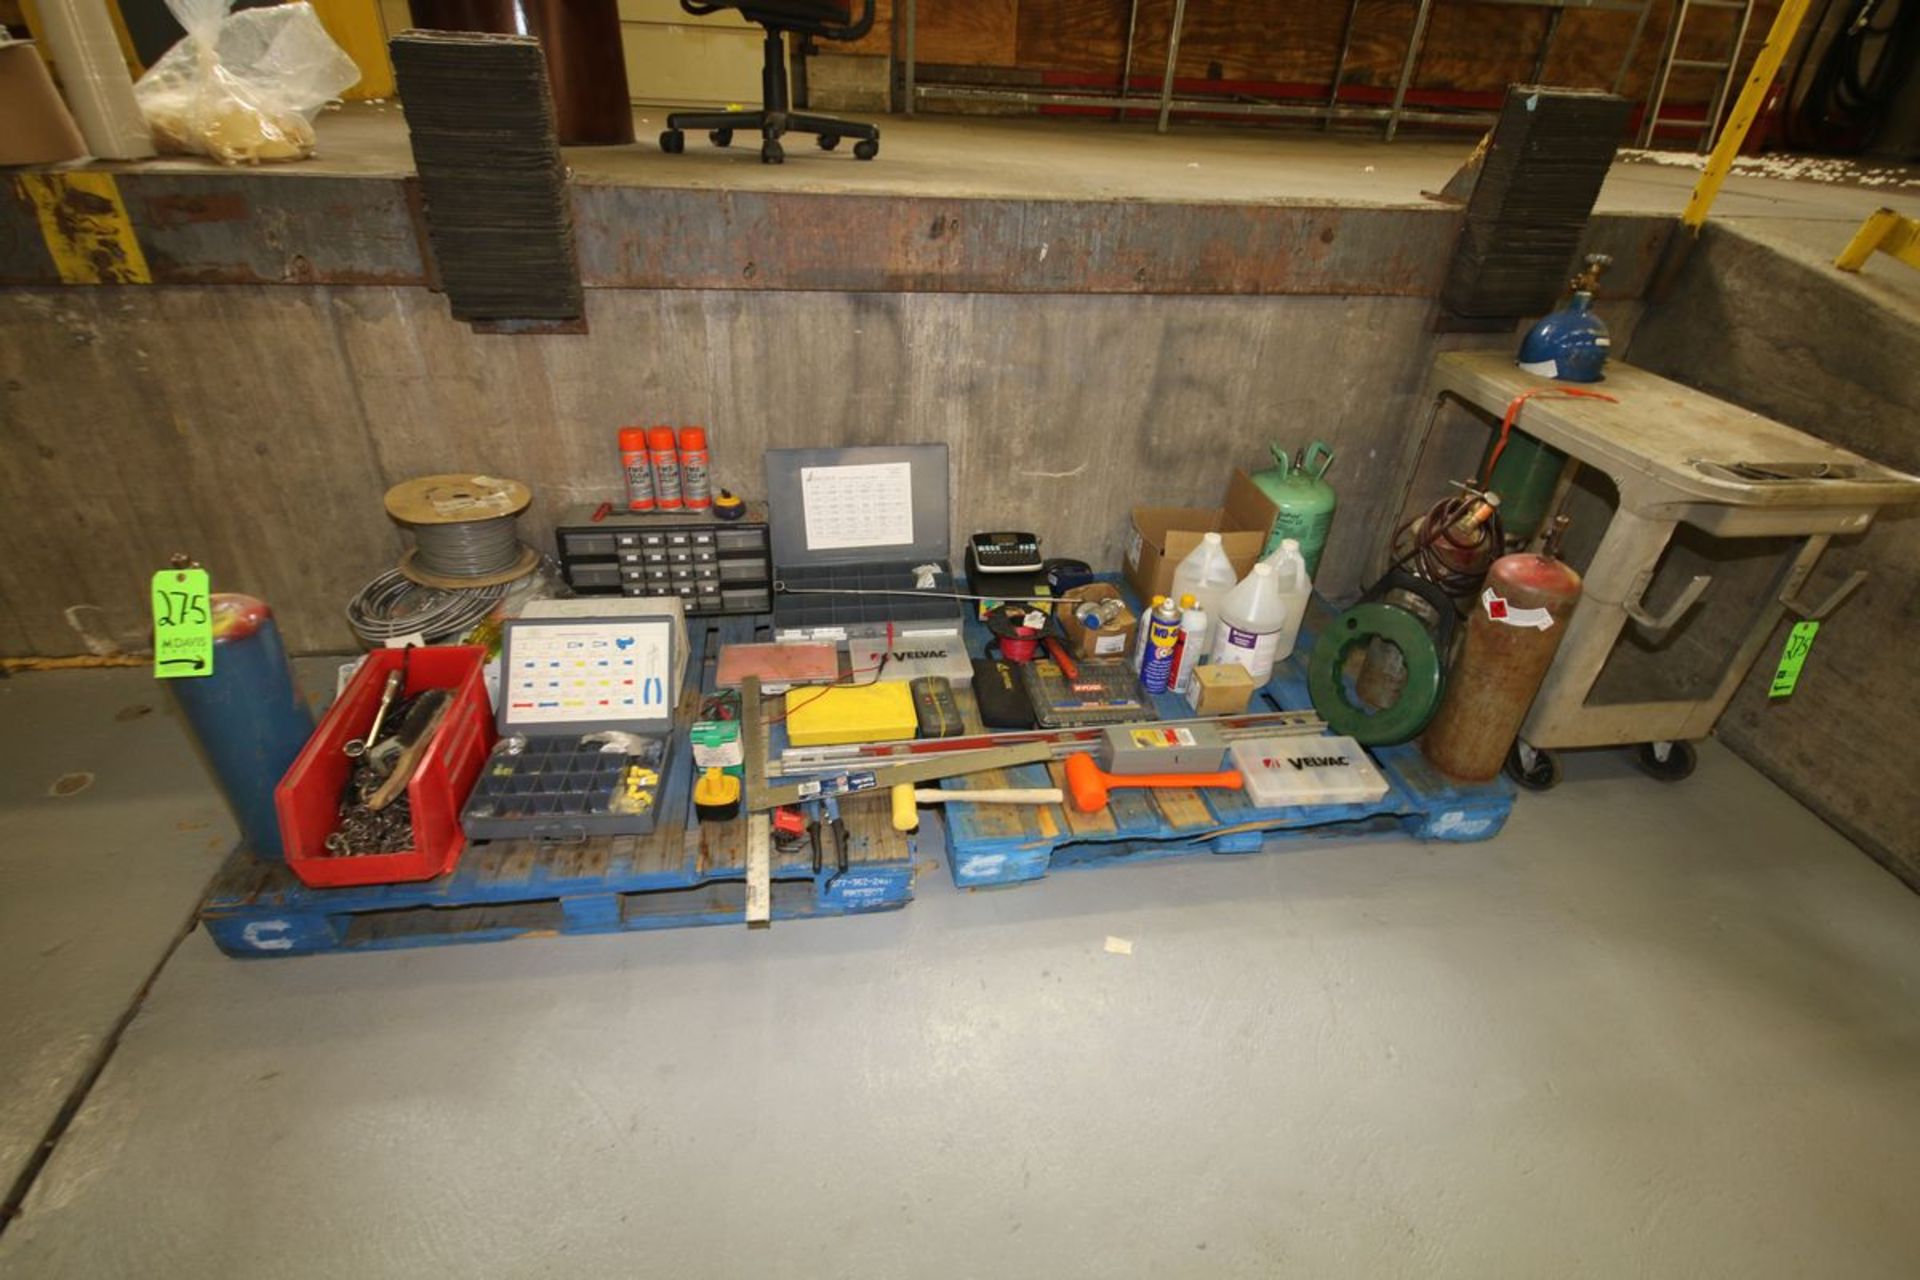 Lot of Assorted Shop Equipment, Includes Cylinders, Electrical Hardware, Nuts and Bolts, Chain,